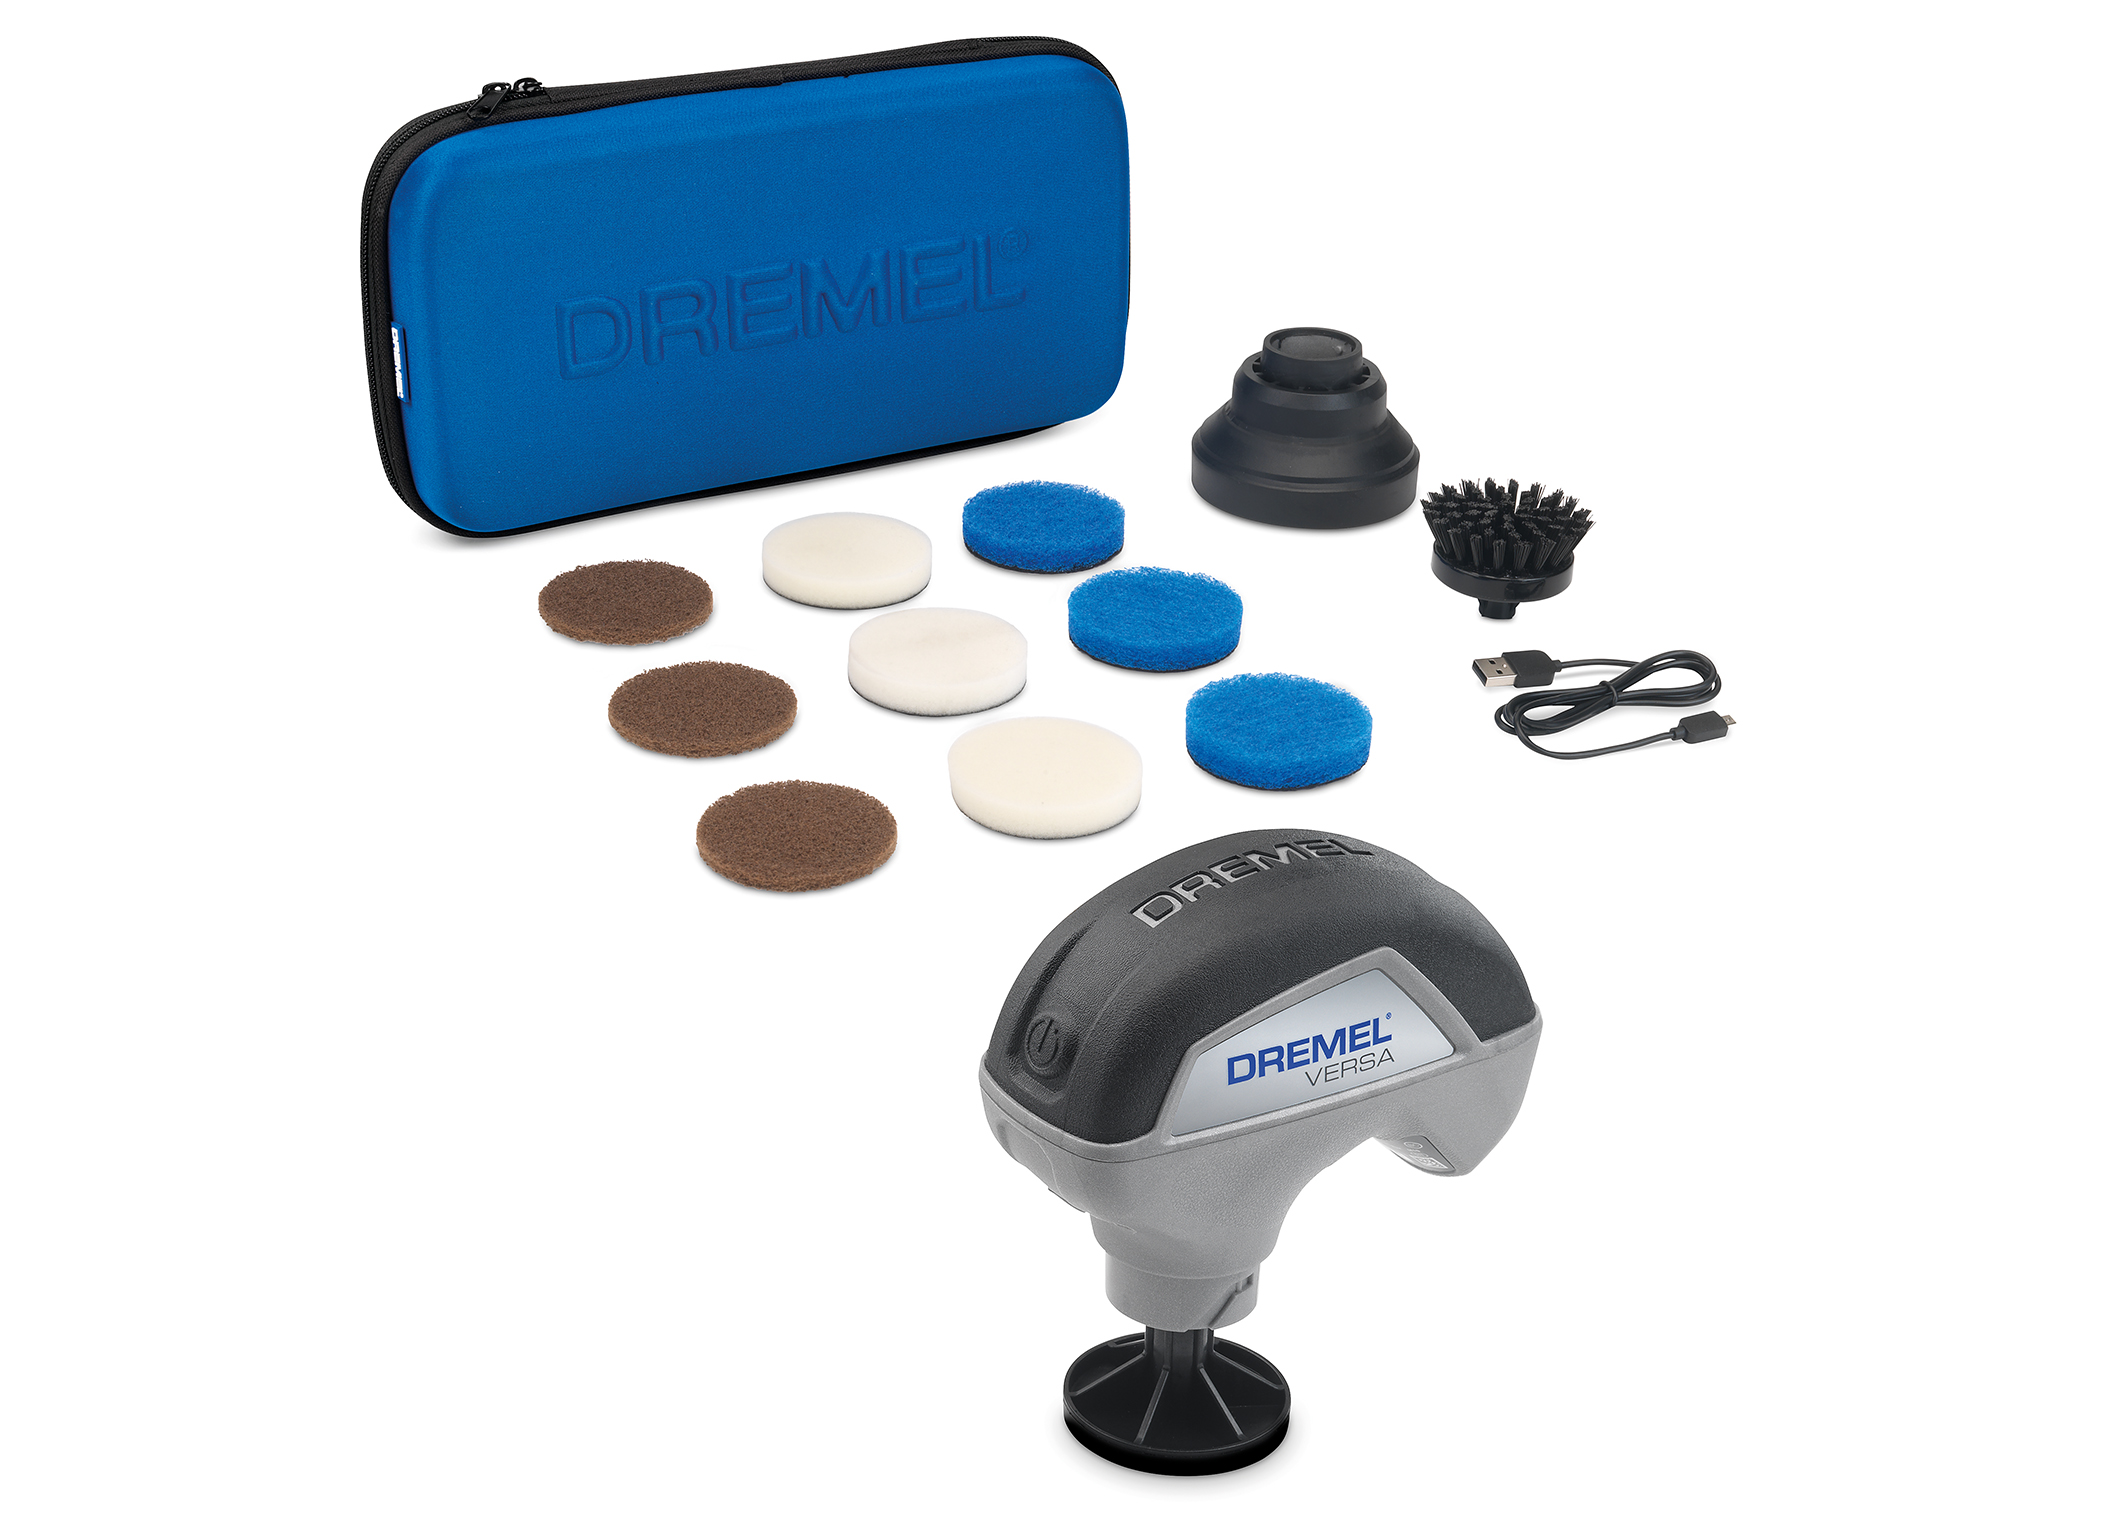 Dremel further taps into product segment for households: Versatile power scrubber Versa.